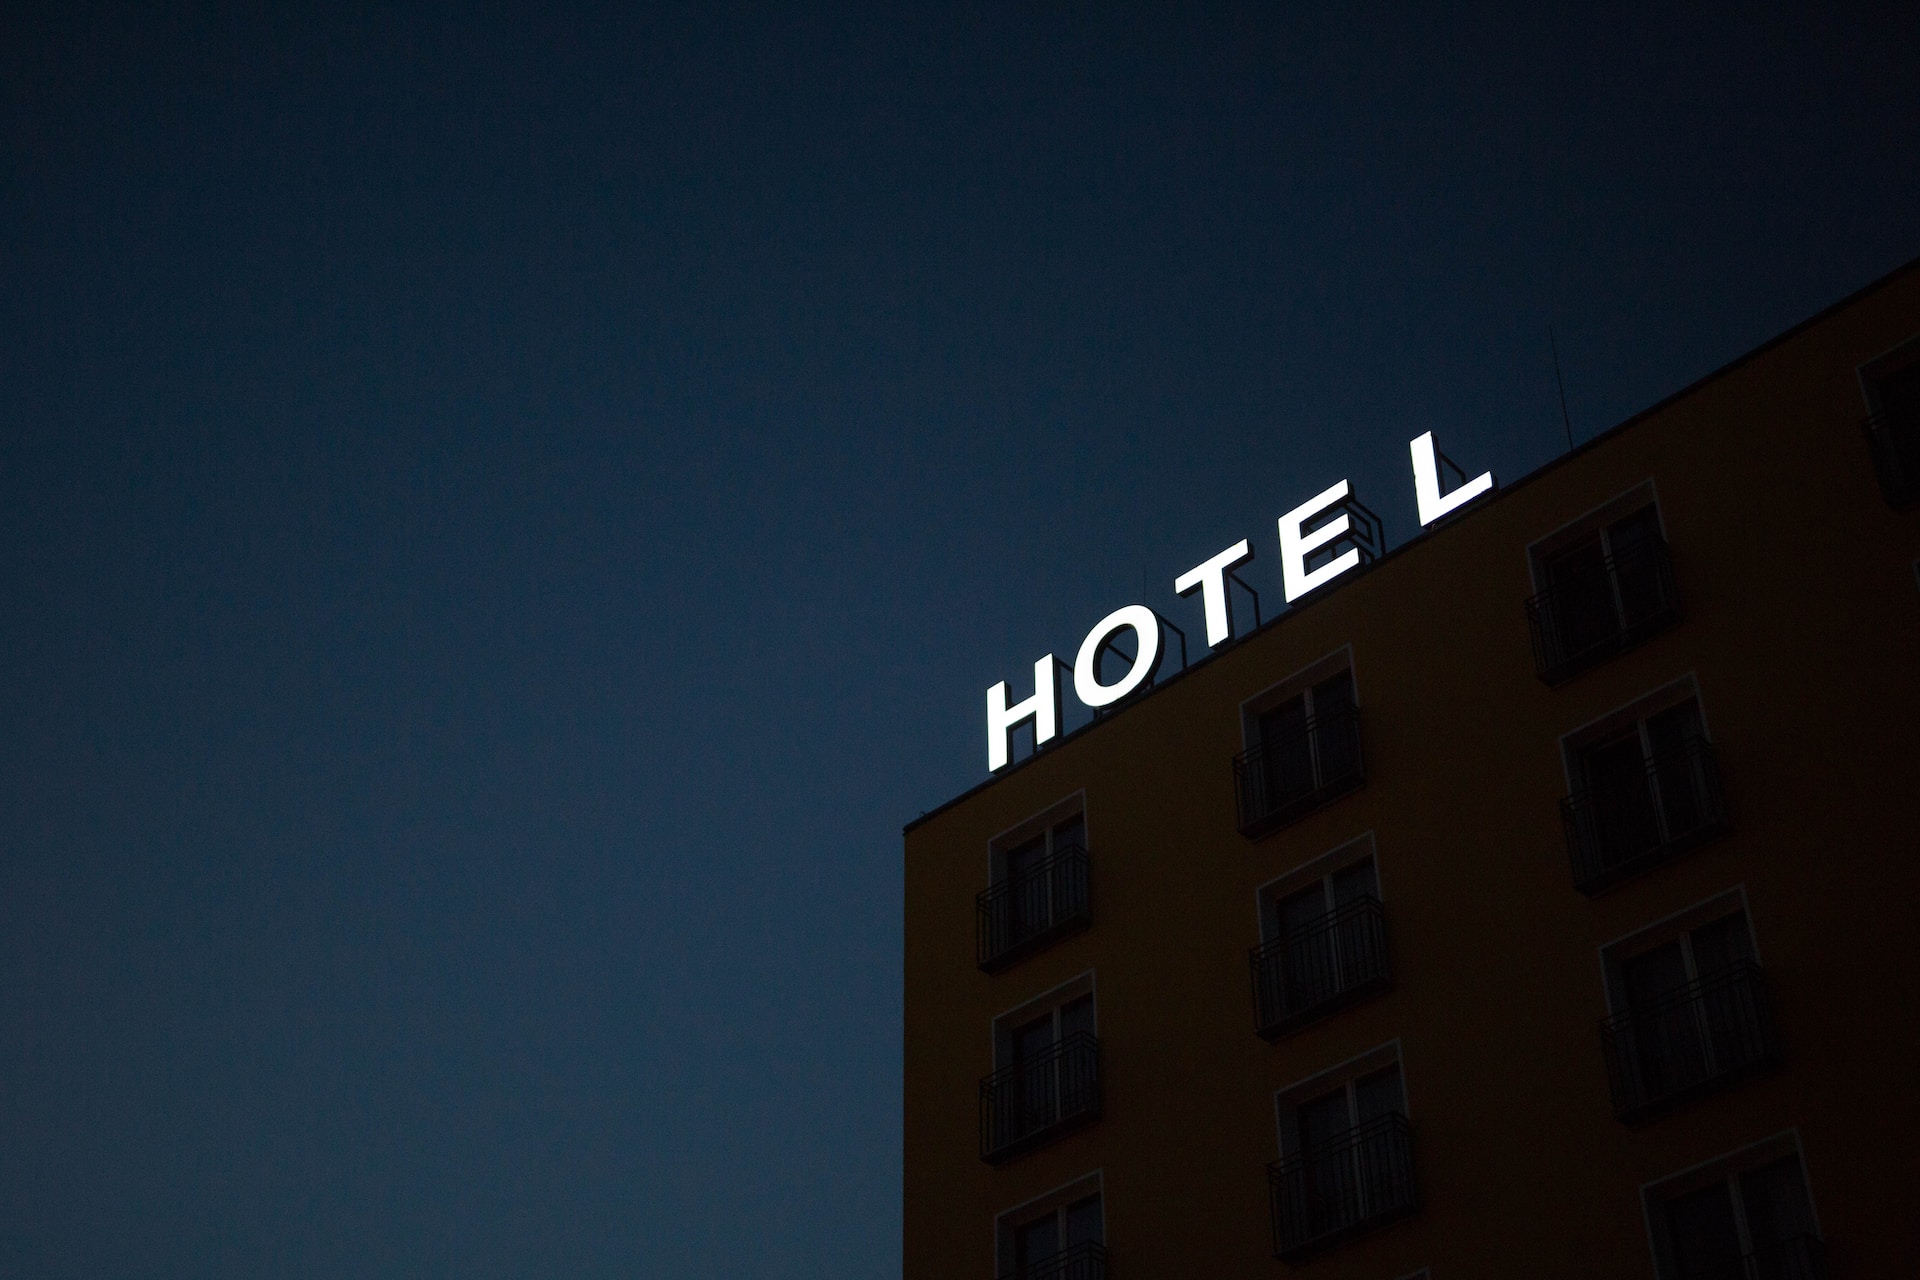 A sign on a building that says 'Hotel"